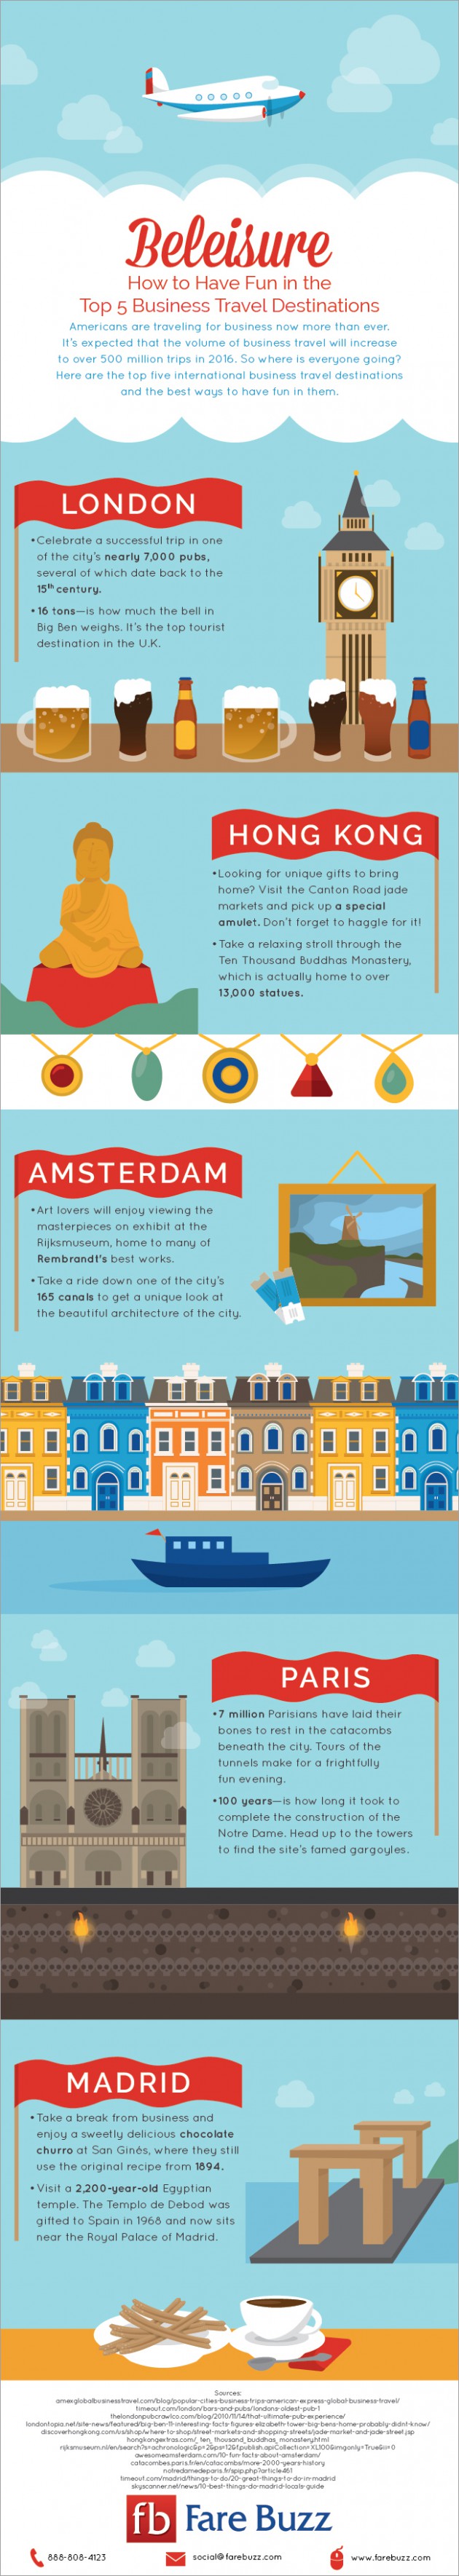 Fare Buzz Beleisure Infographics - How to Have Fun in the Top 5 Business Travel Destinations